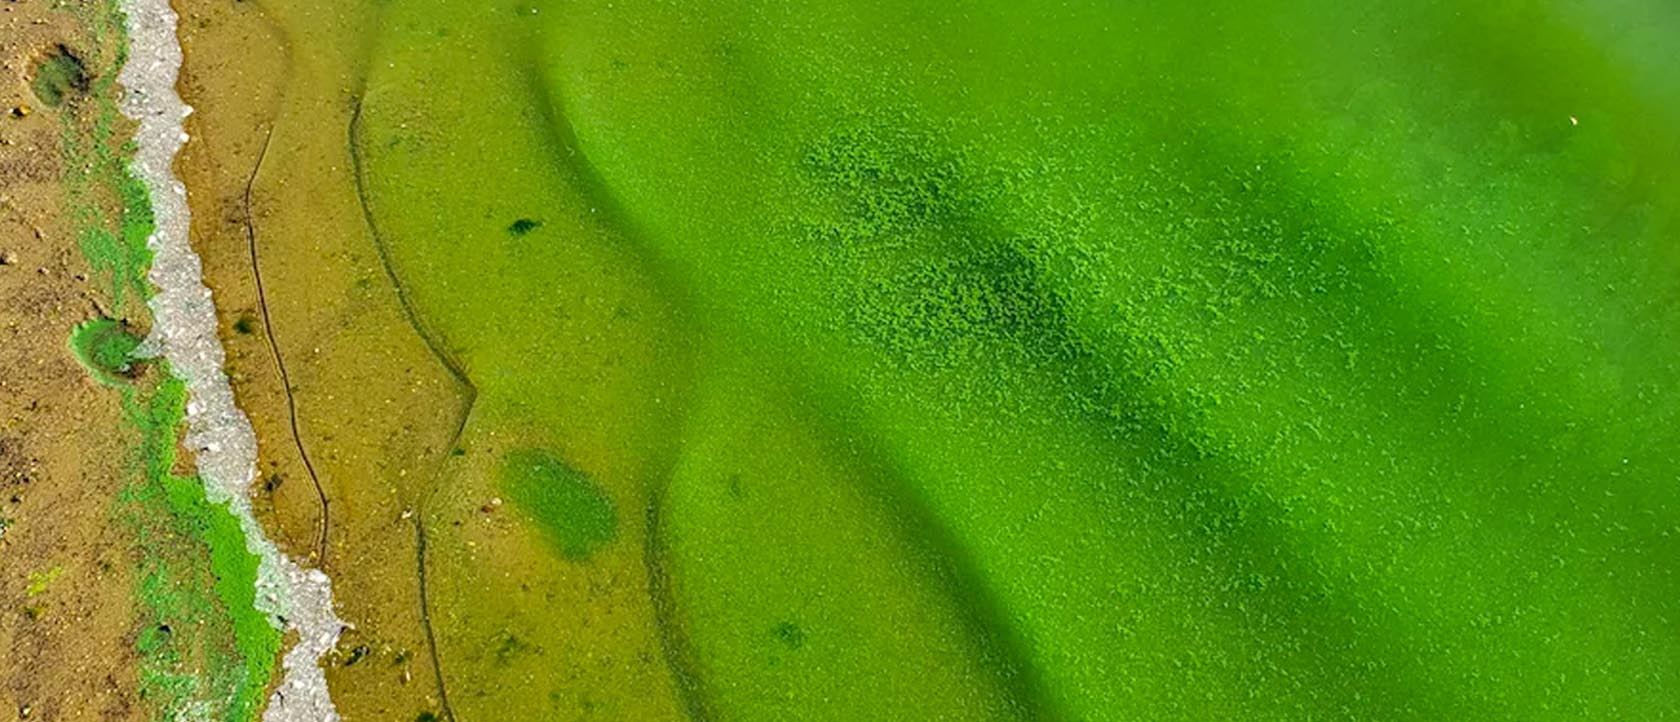 Scientists: Algal Blooms Release A Dangerous Toxin Into The Air - LG Sonic